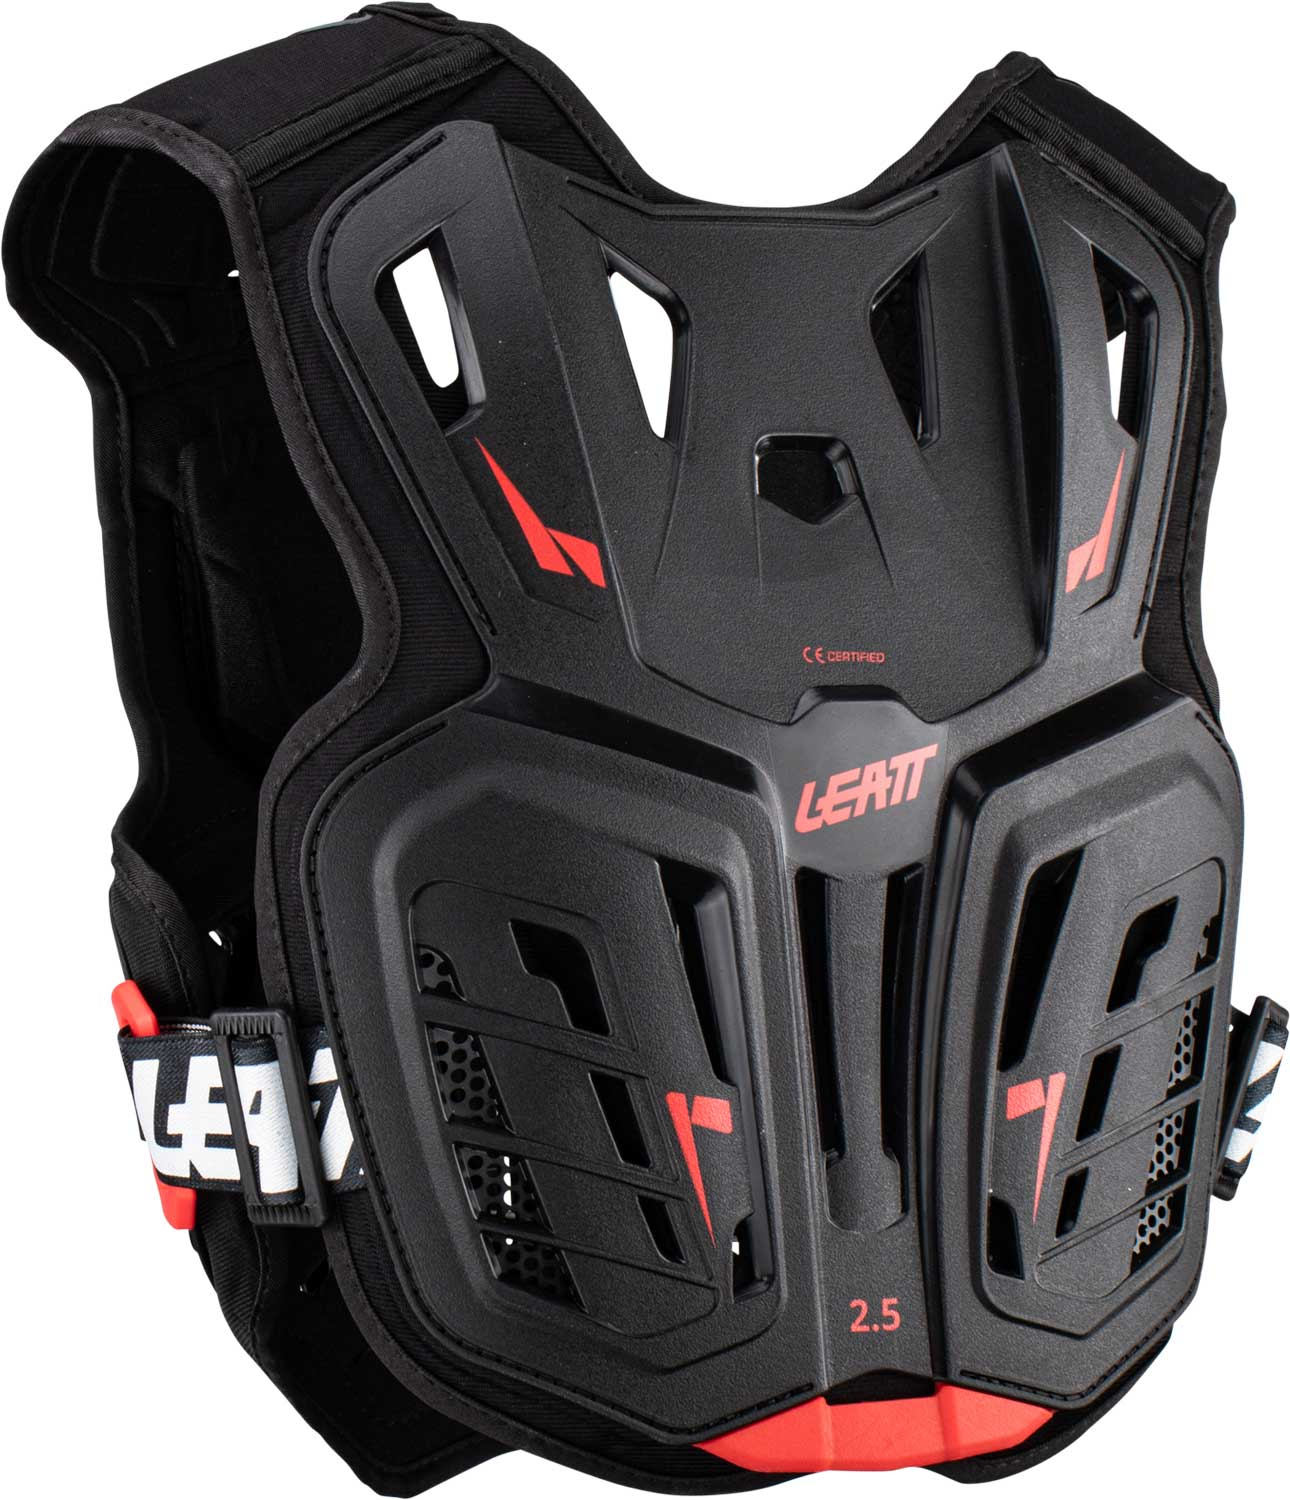 Leatt Junior MX Motocross Armour Kids Chest Protector 2.5 Roost Protection S/M 